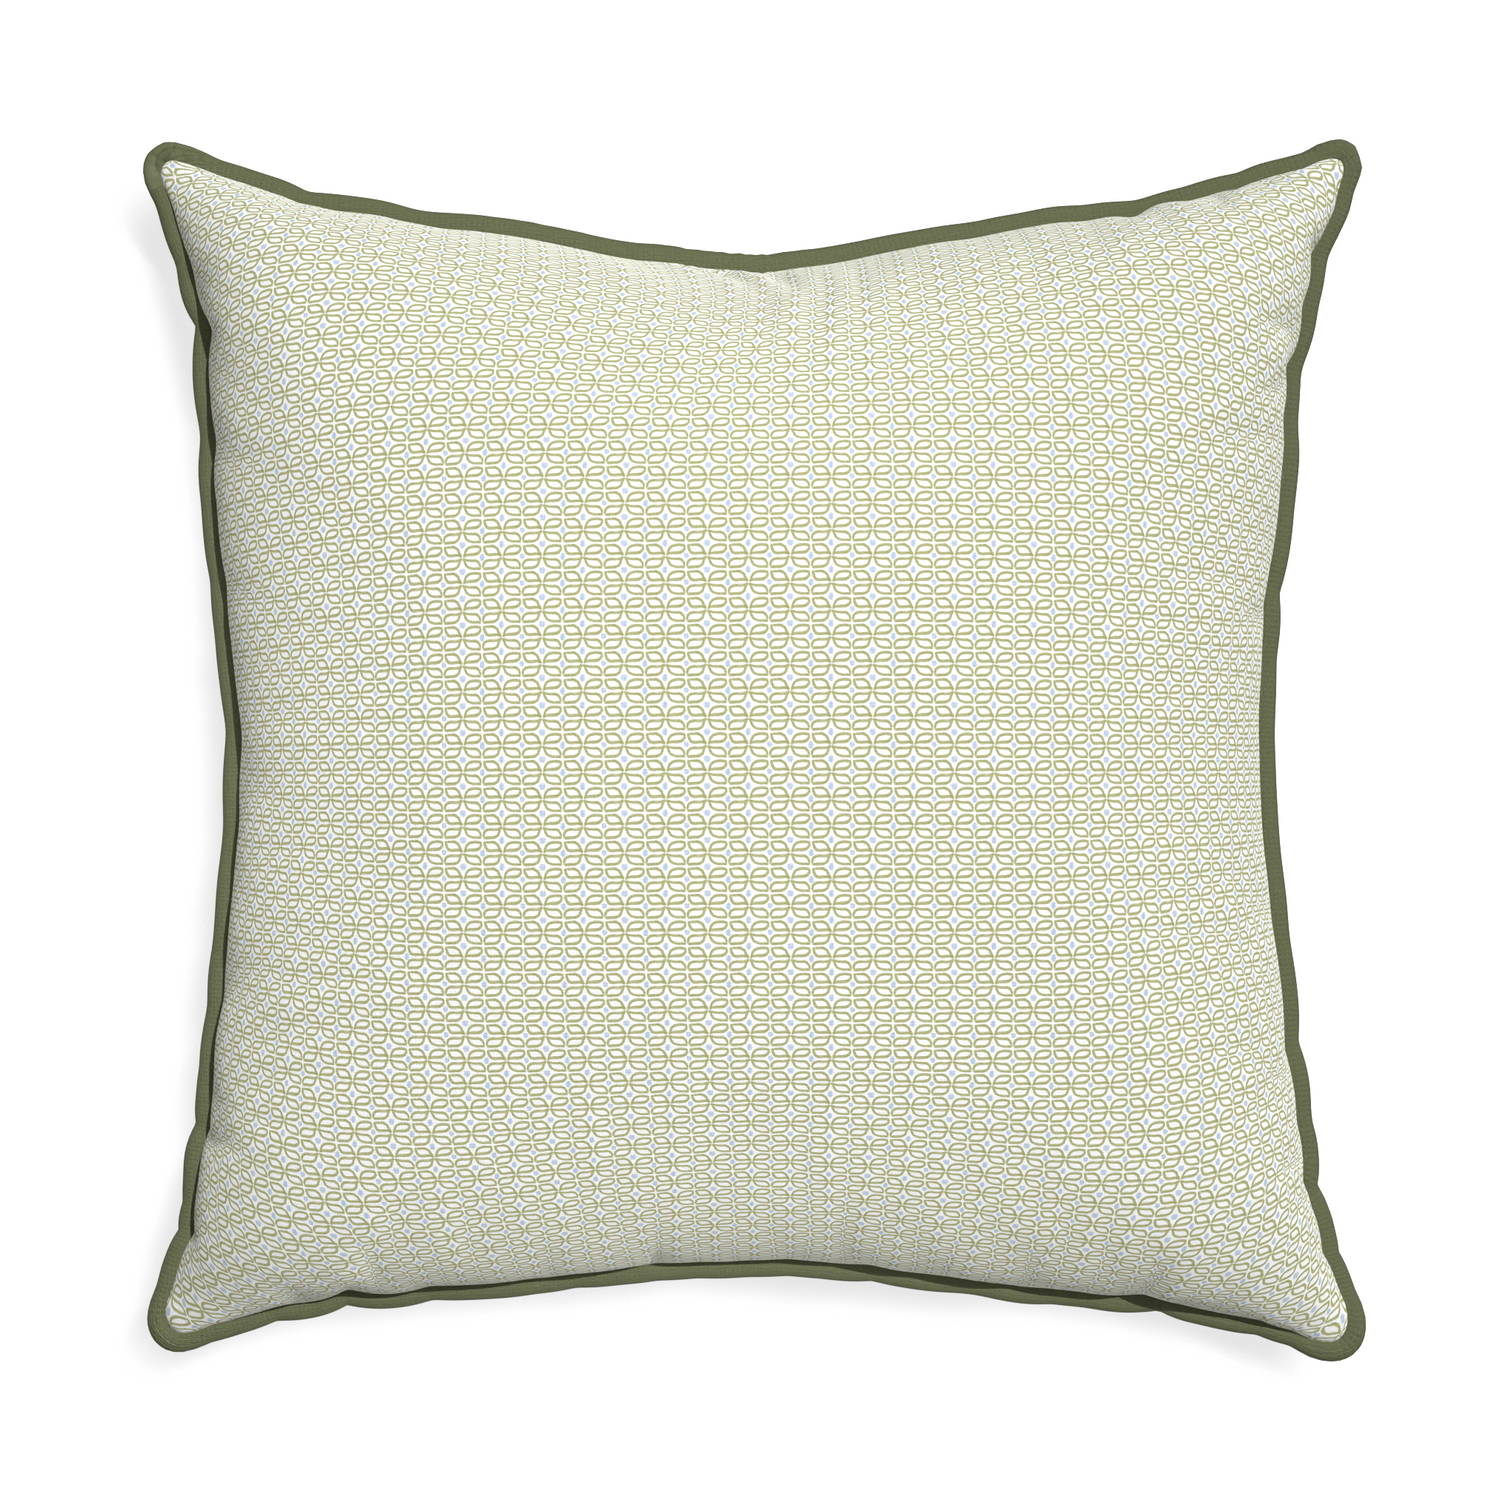 Euro-sham loomi moss custom pillow with f piping on white background